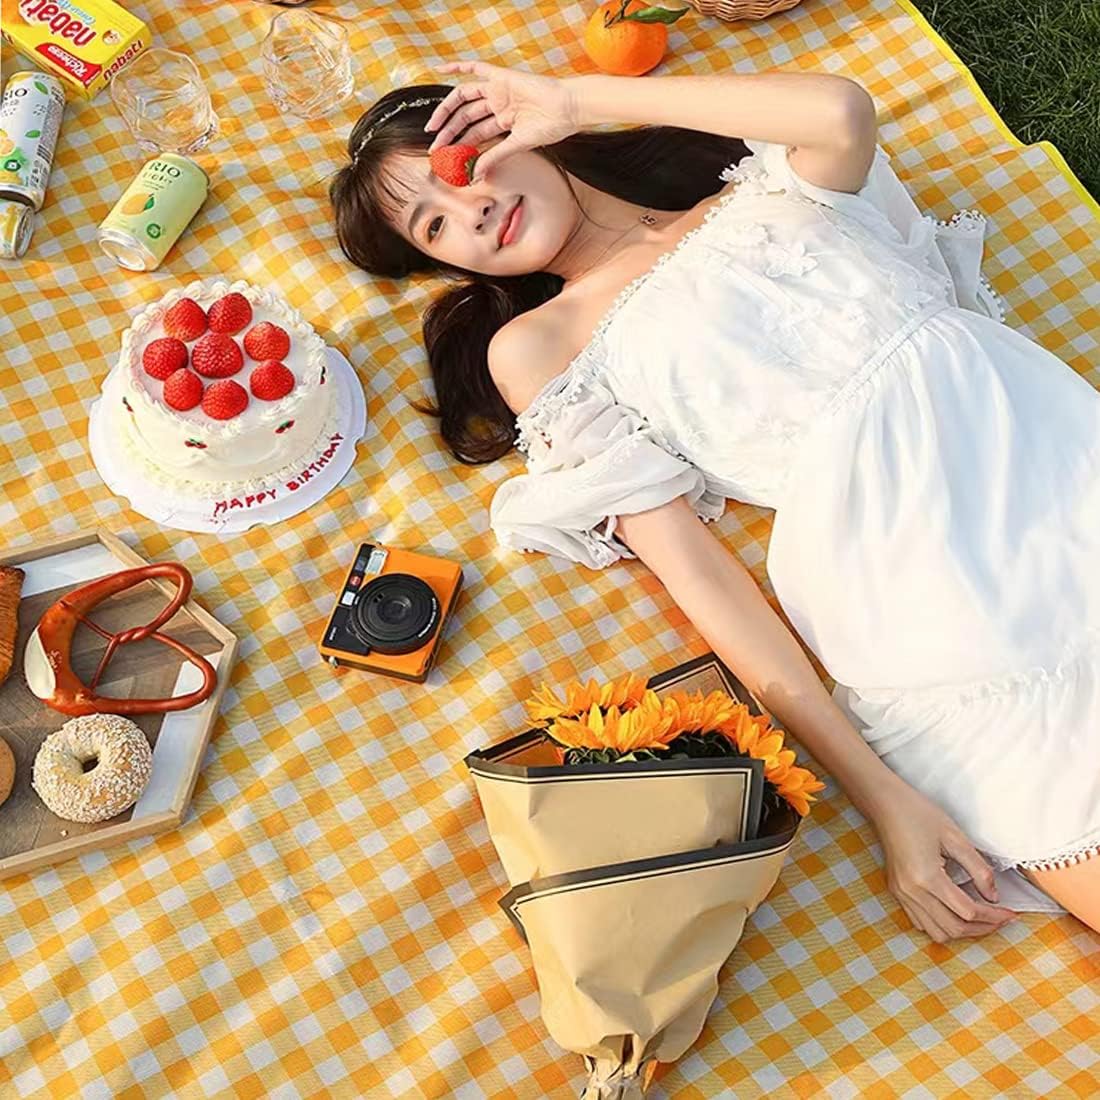 What are the disadvantages of using a plastic acrylic picnic mat?